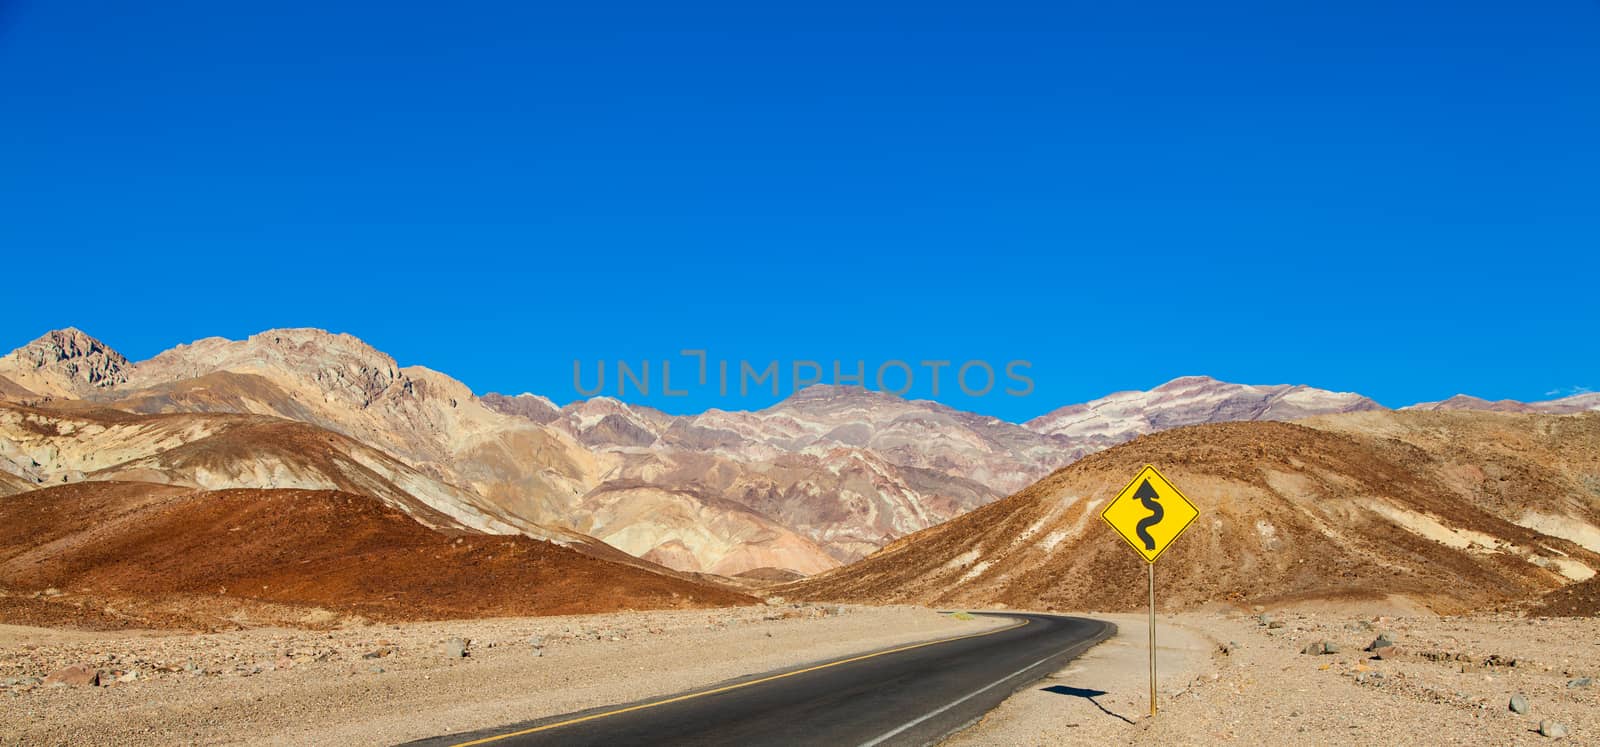 Death Valley, California. Road in the middle of the desert